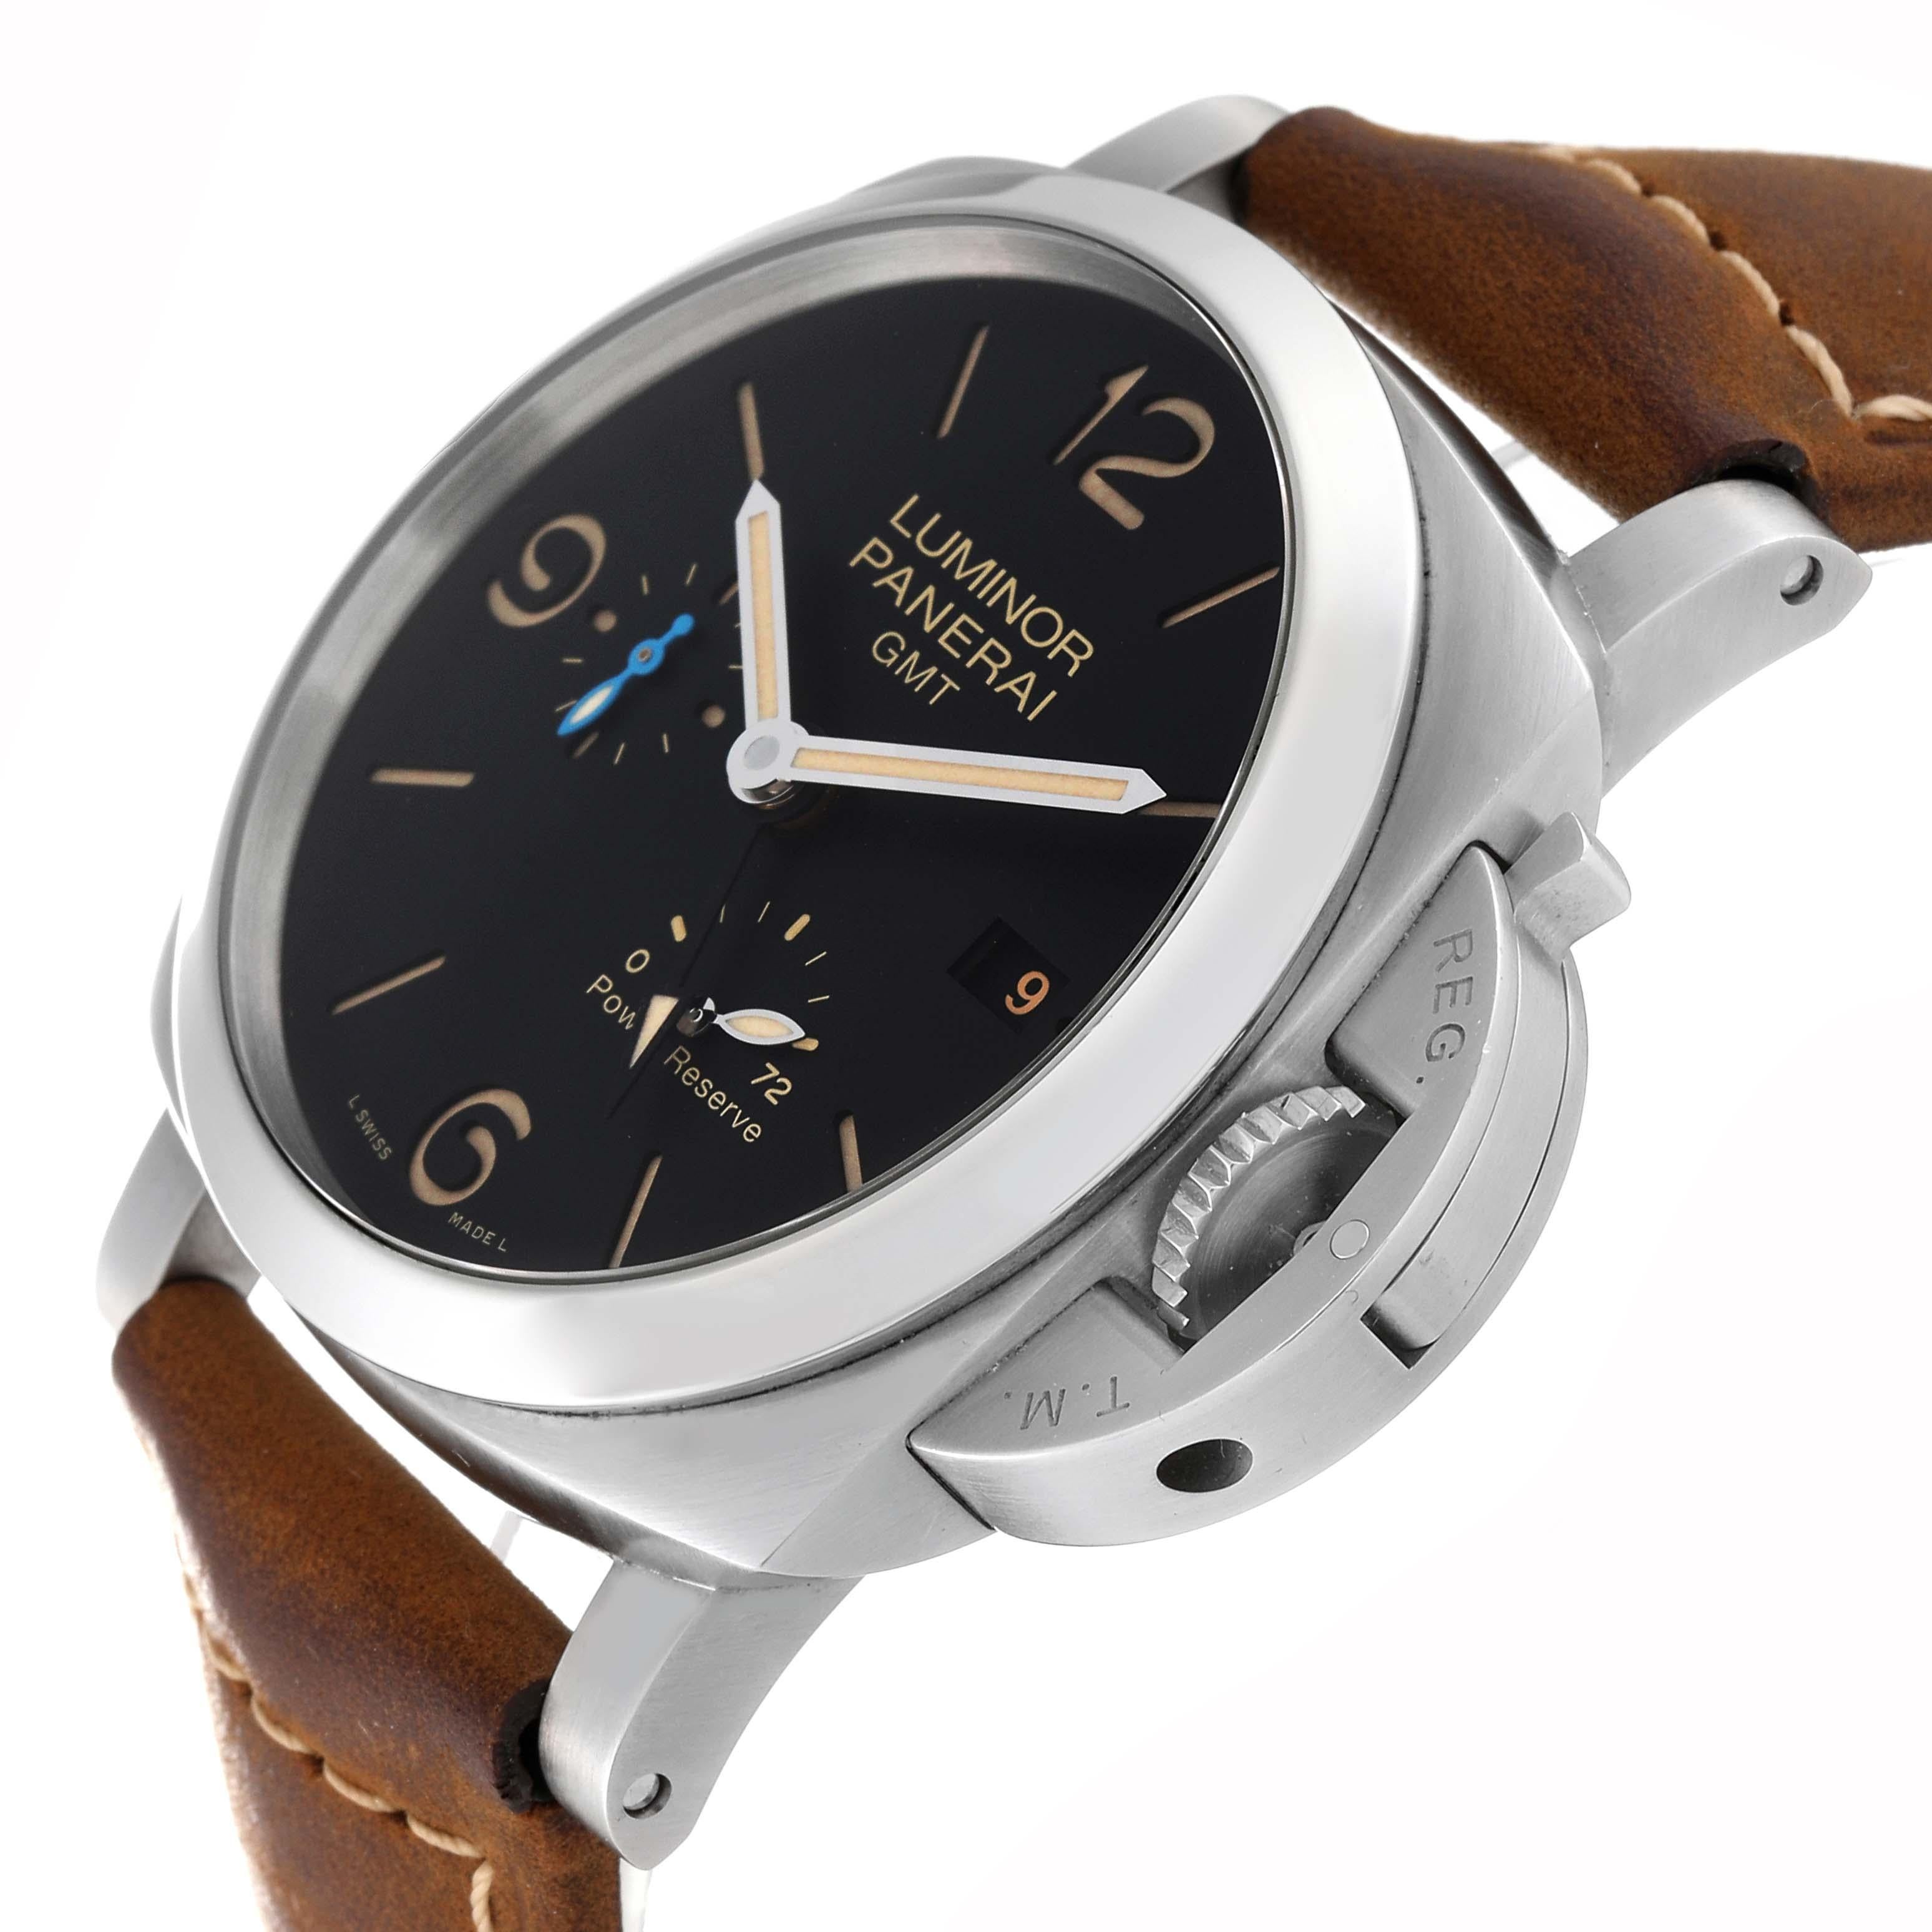 Panerai Luminor Marina 1950 3 Days GMT Steel Mens Watch PAM01321 Box Card. Automatic self-winding movement. Two part cushion shaped stainless steel case 44.0 mm in diameter. Panerai patented crown protector. Transparent exhibition sapphire crystal